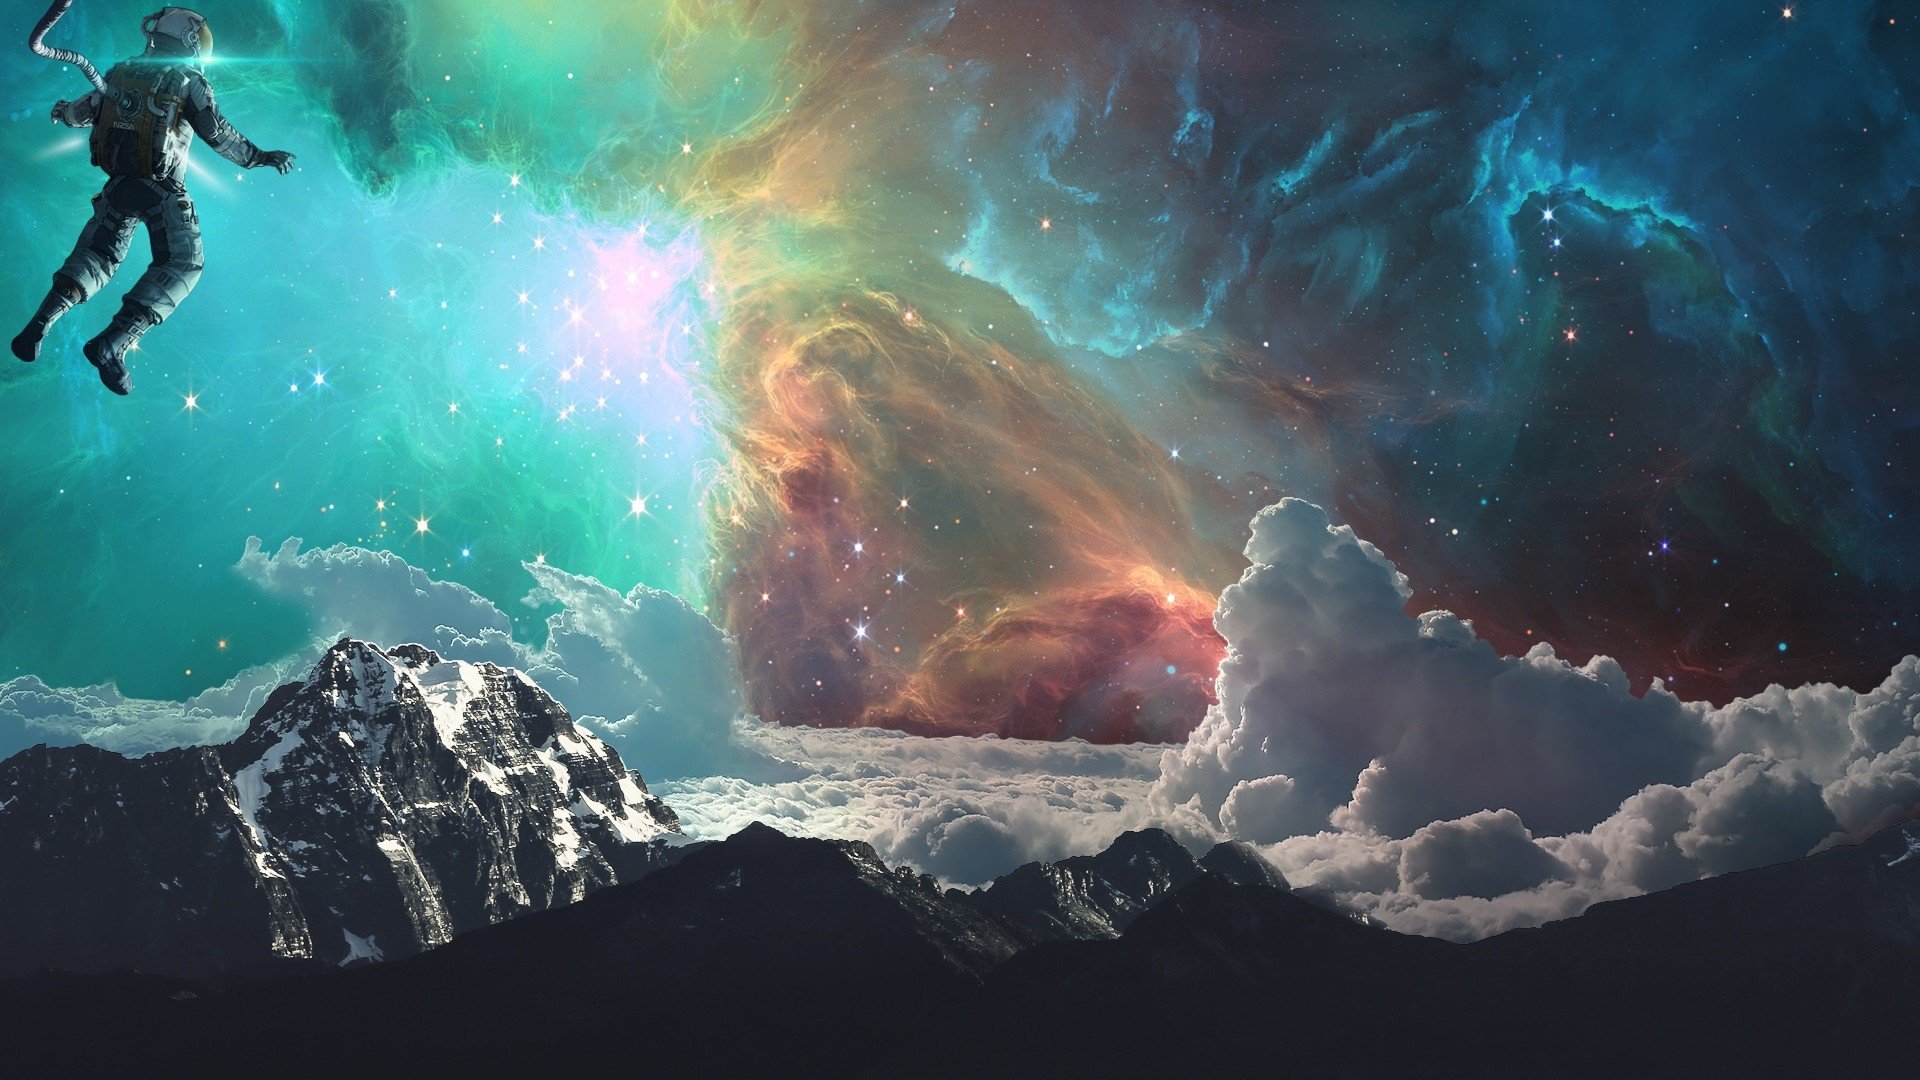 astronaut, Space, Galaxy, Earth, Clouds, Mountains, Photo manipulation, Science fiction Wallpaper